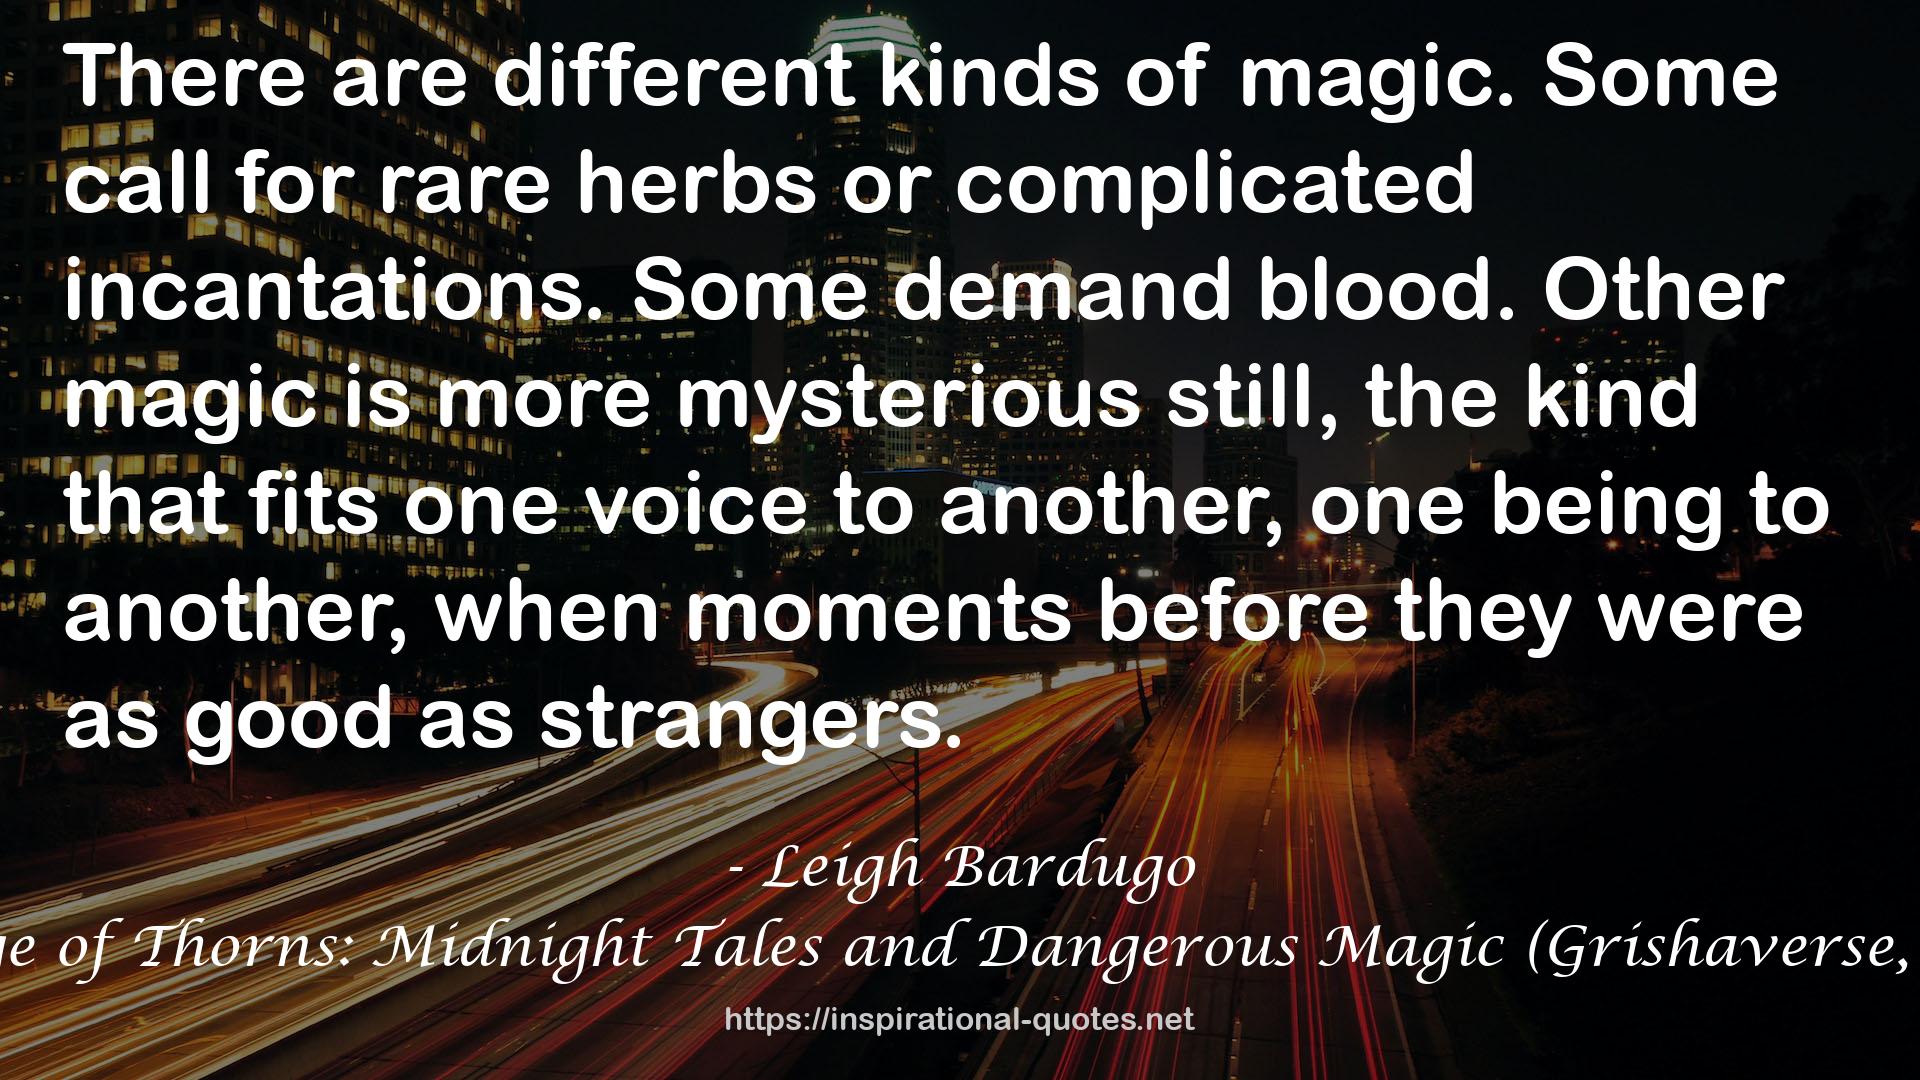 The Language of Thorns: Midnight Tales and Dangerous Magic (Grishaverse, #0.5, 2.5, 2.6) QUOTES